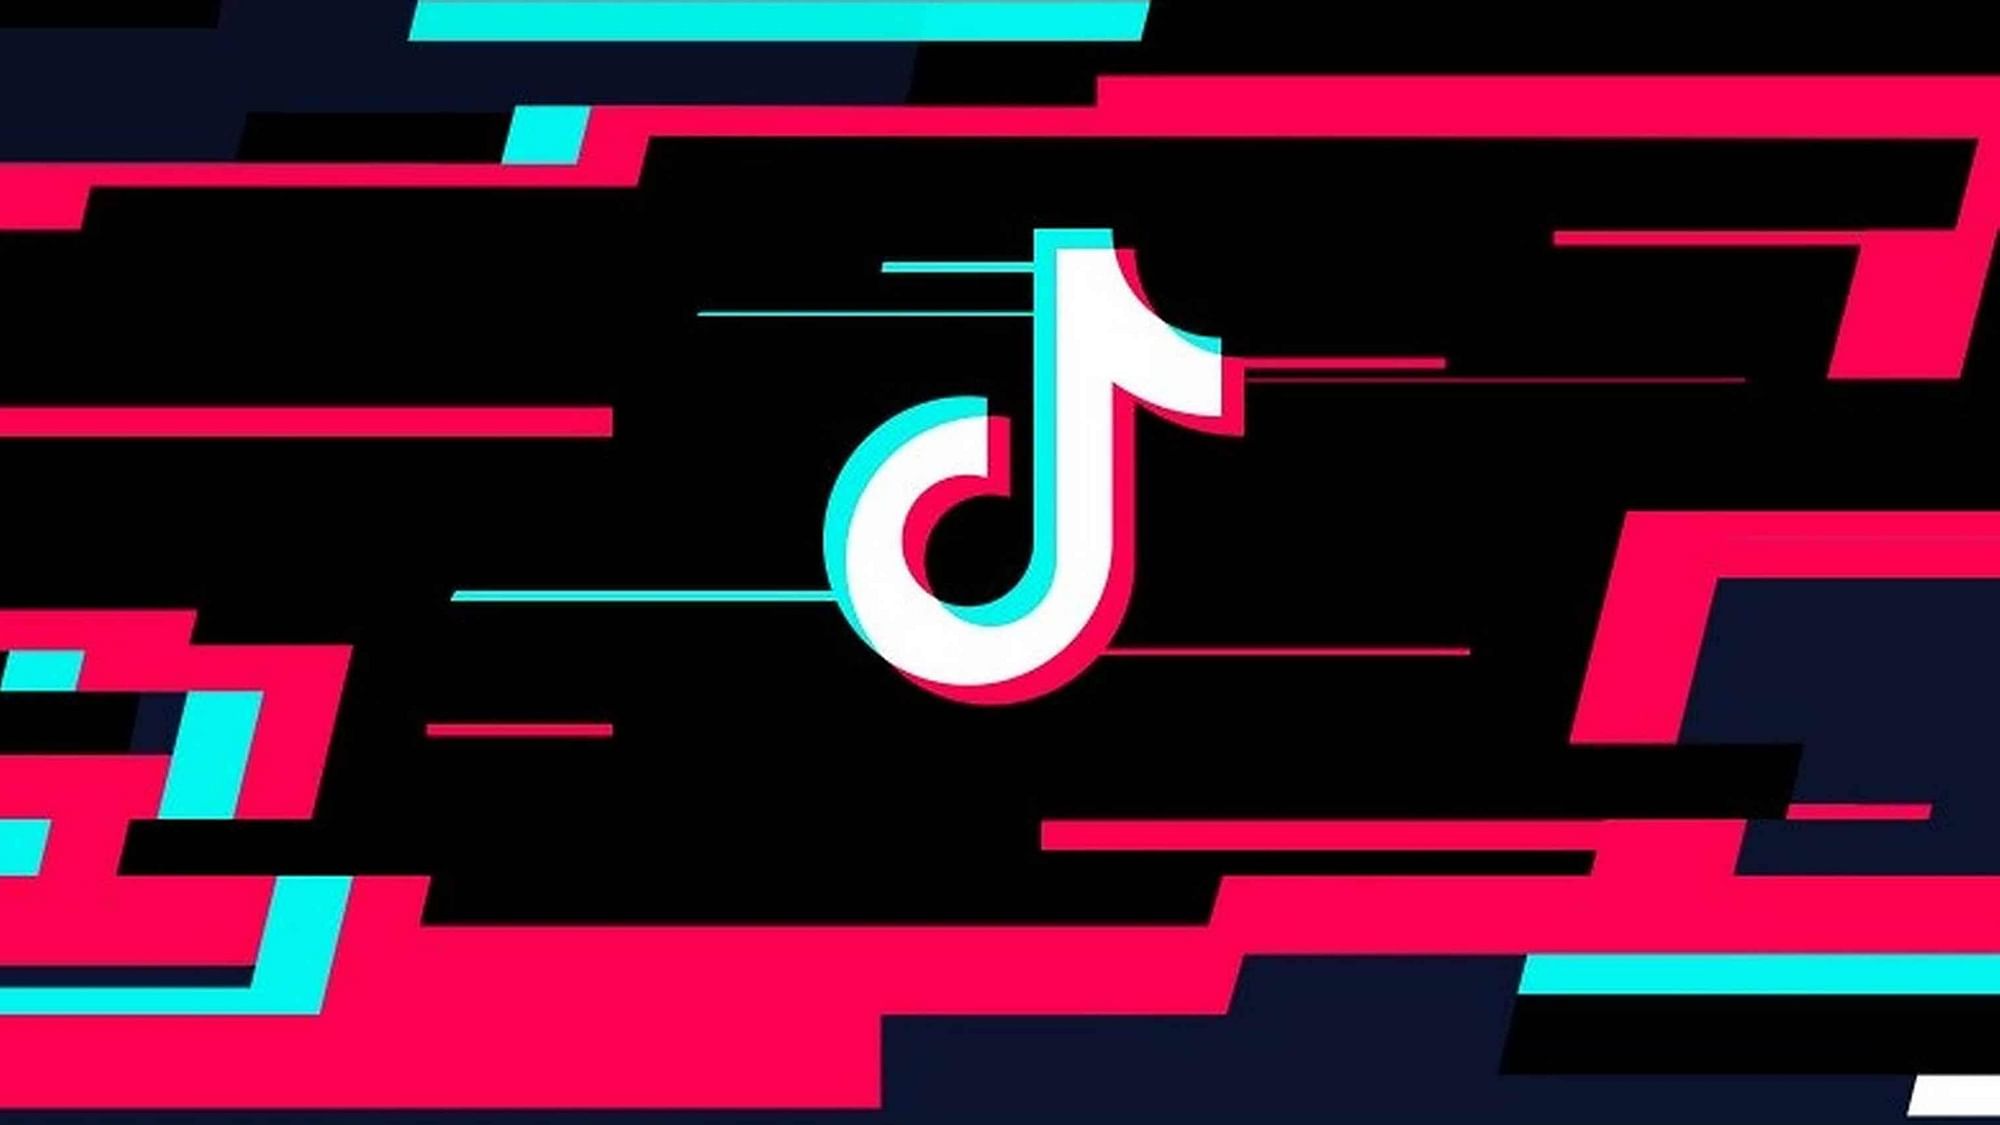 TikTok has been taken down from both the Google Play Store and the Apple App Store after the Madras HC refused to lift the ban on the video sharing platform.